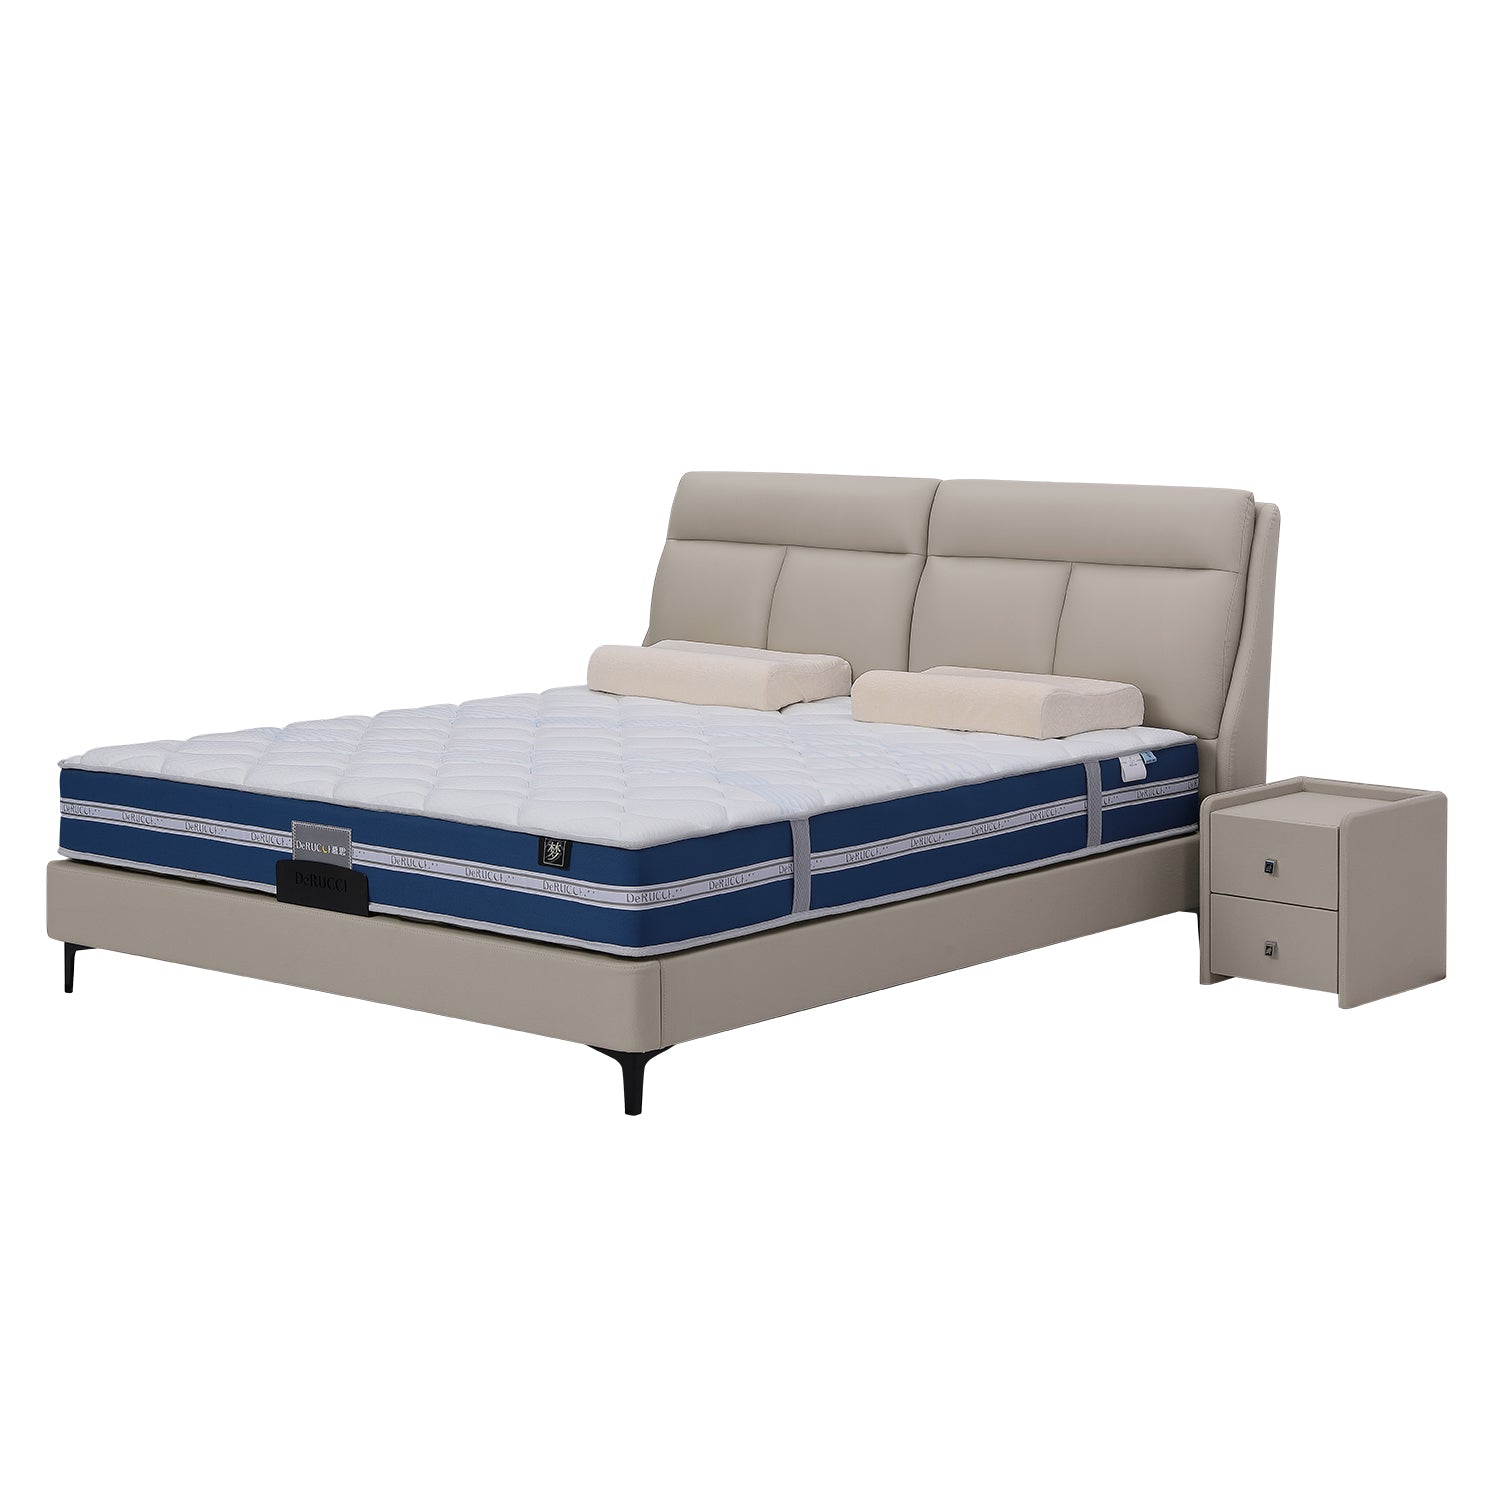 DeRUCCI bed frame model BOC1 - 002 in top layer leather and PVC with padded headboard, mattress, pillows, and matching nightstand.